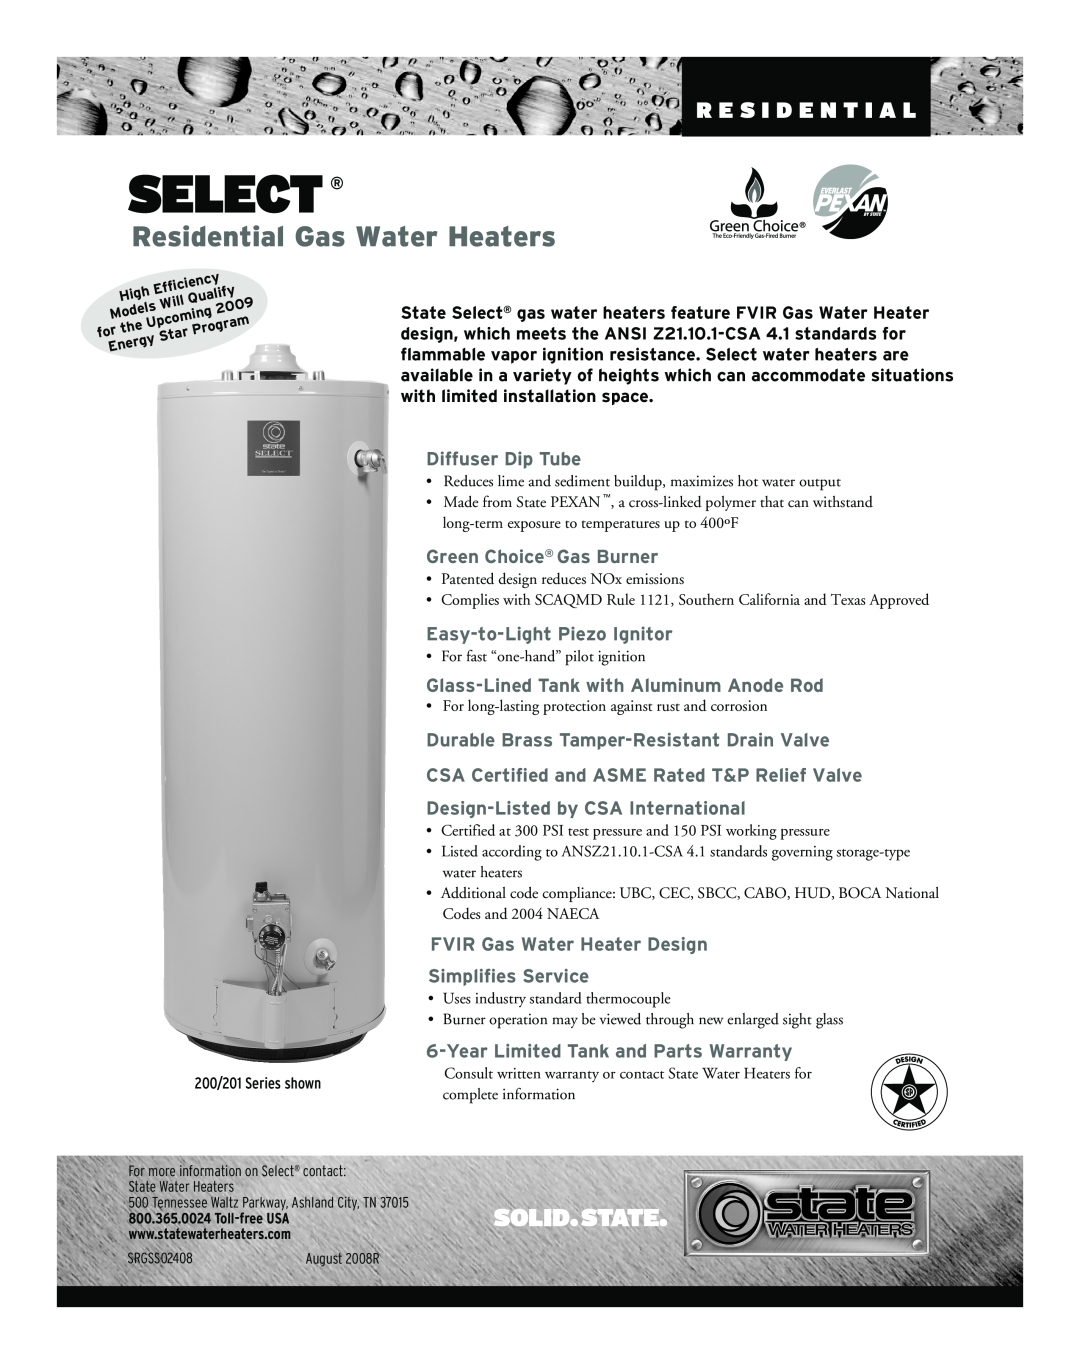 State Industries 201 Series warranty Select, Residential Gas Water Heaters, R E S I D E N T I A L, Diffuser Dip Tube 